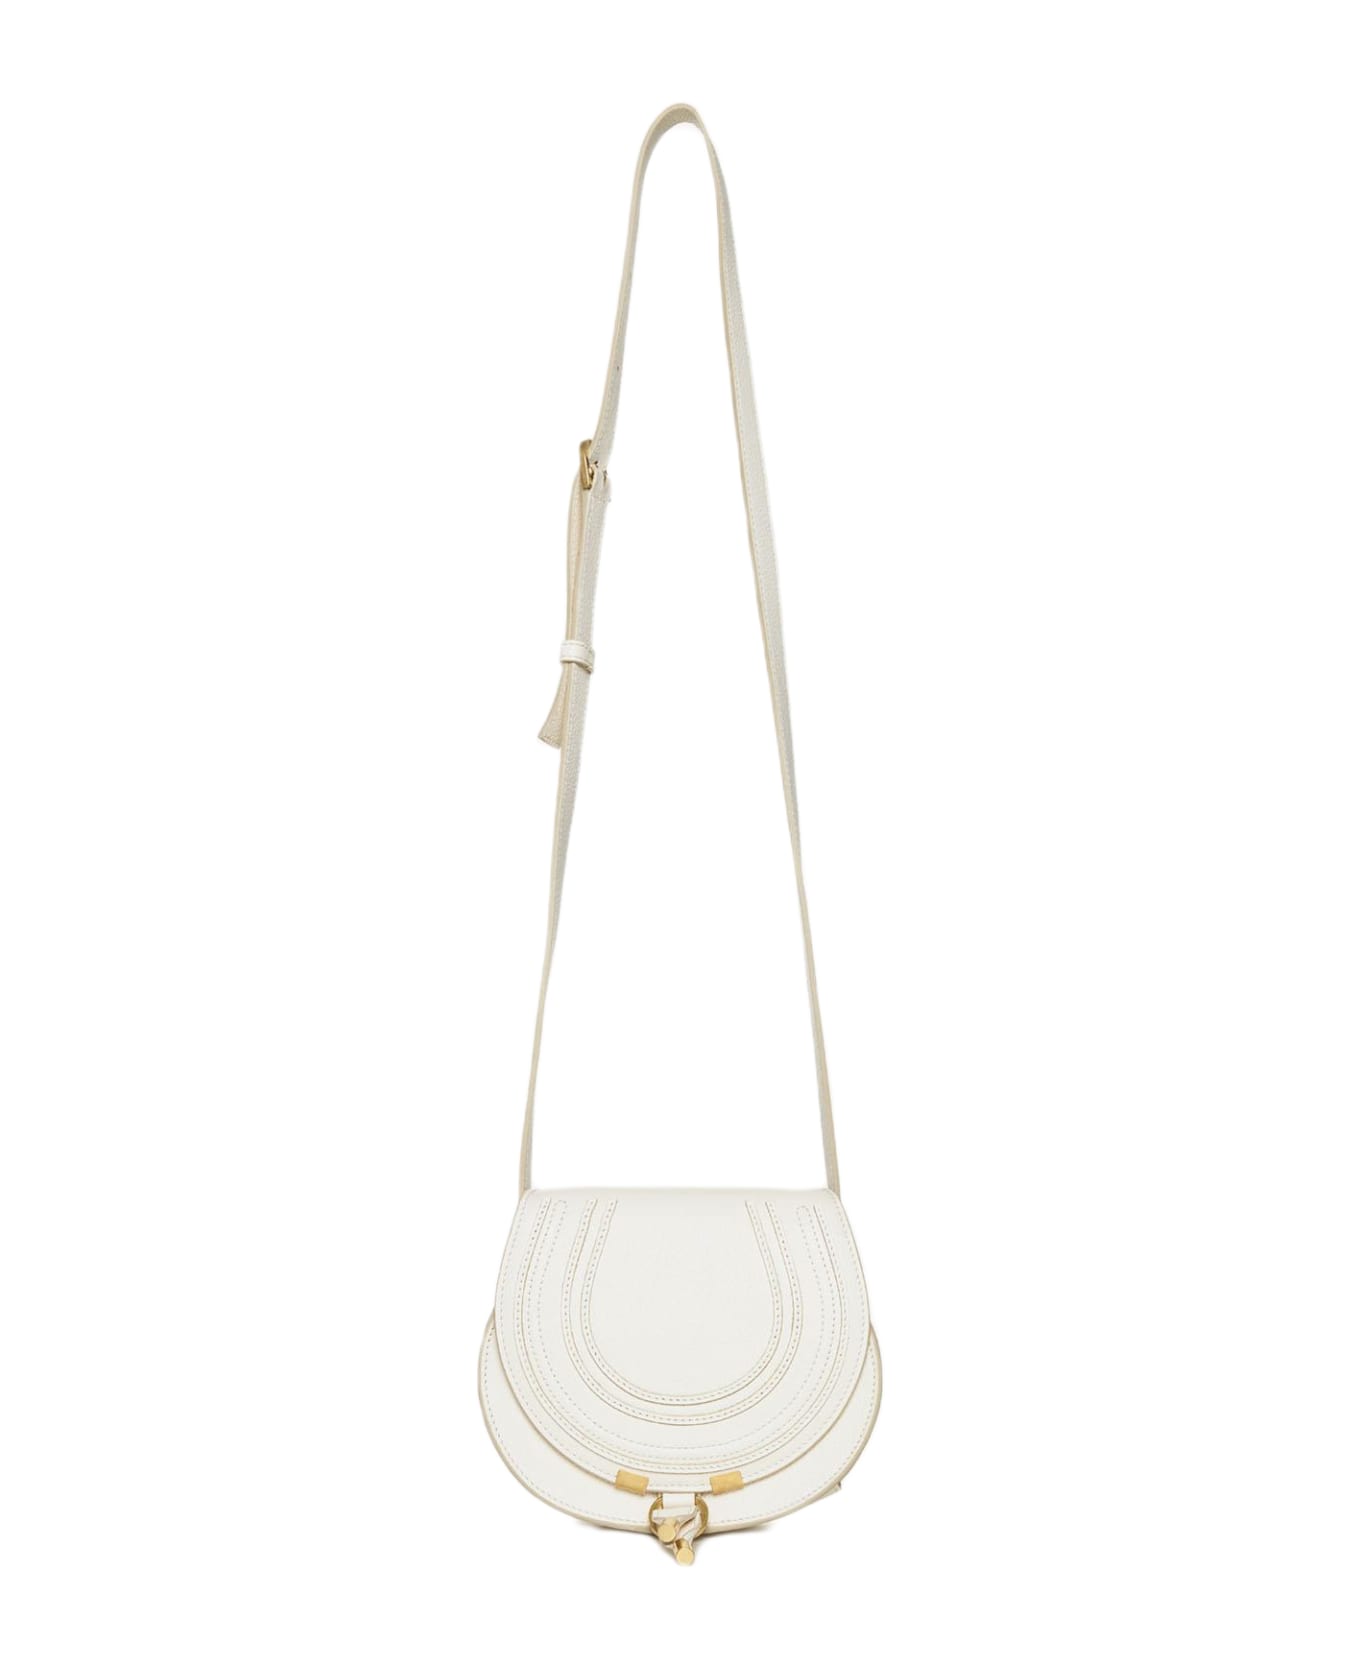 Chloé Marcie Leather Small Bag - White